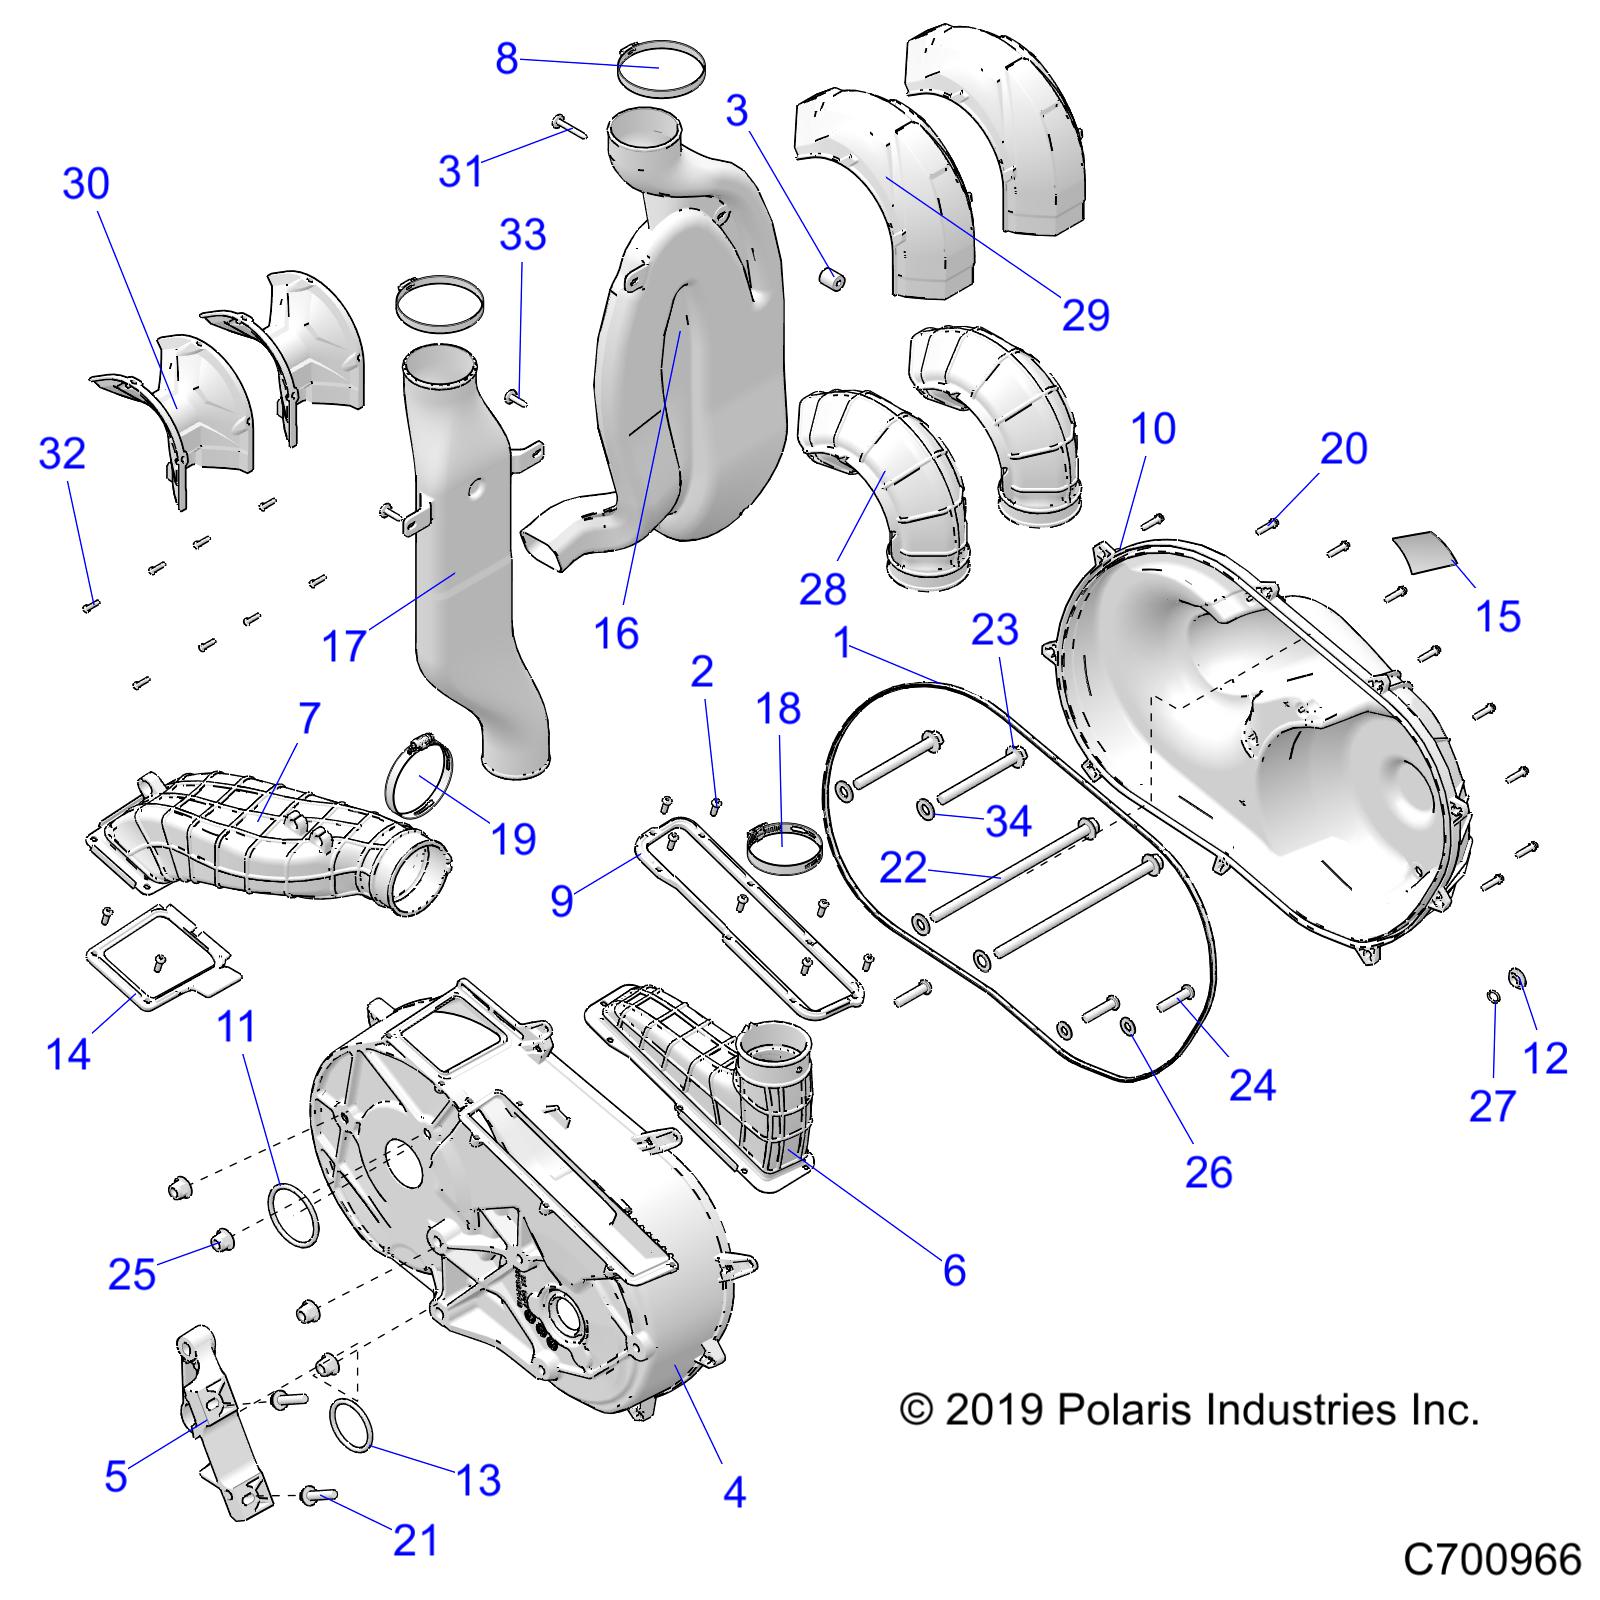 DRIVE TRAIN, CLUTCH COVER AND DUCTING - R20RRM99AL (C700966)